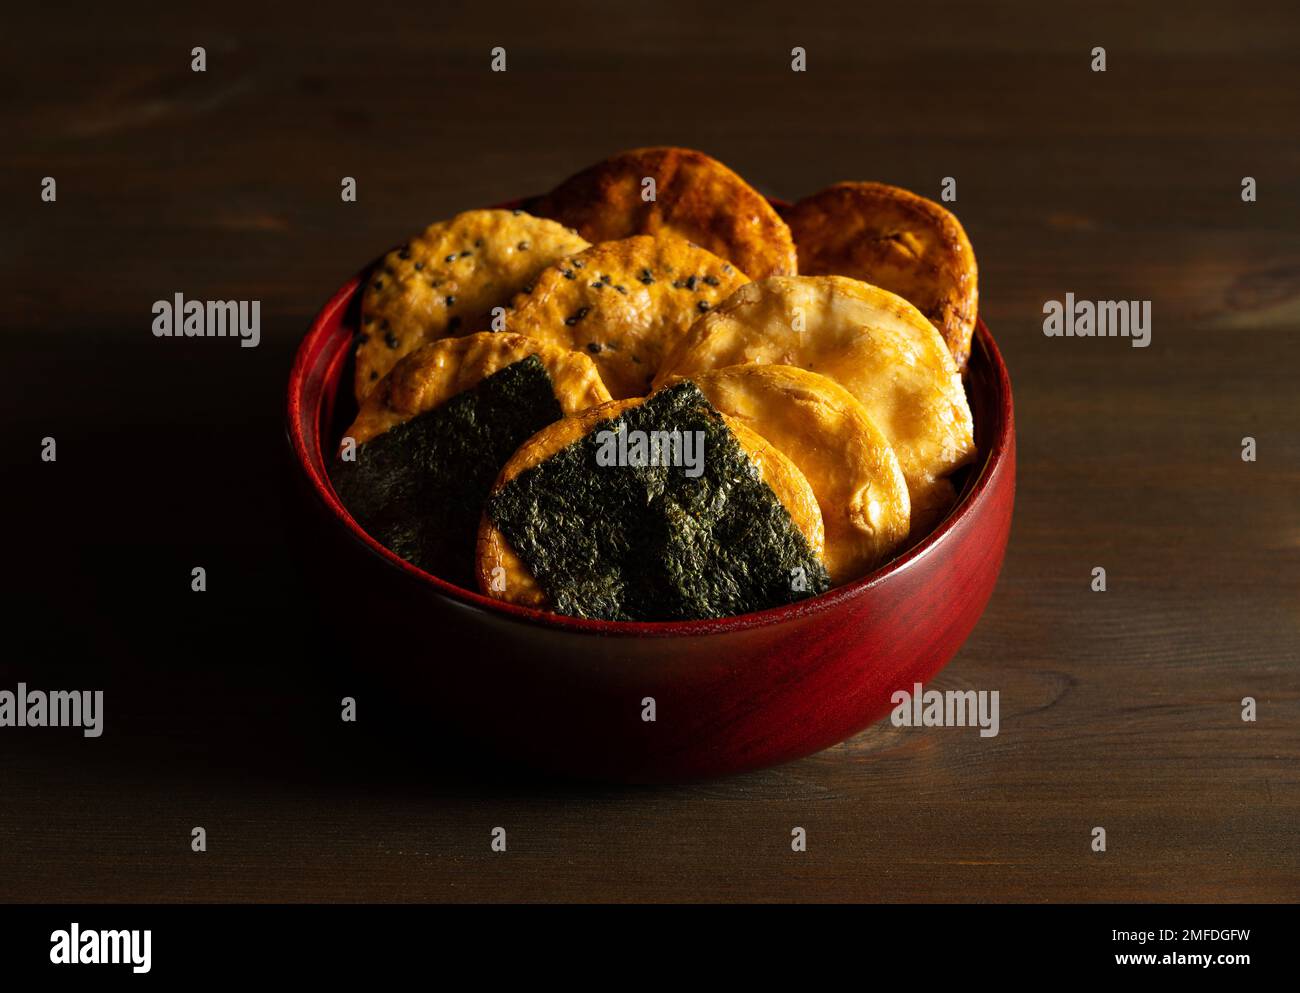 Sembei on the table. Sembei is a Japanese snack. Japanese image photo. Stock Photo